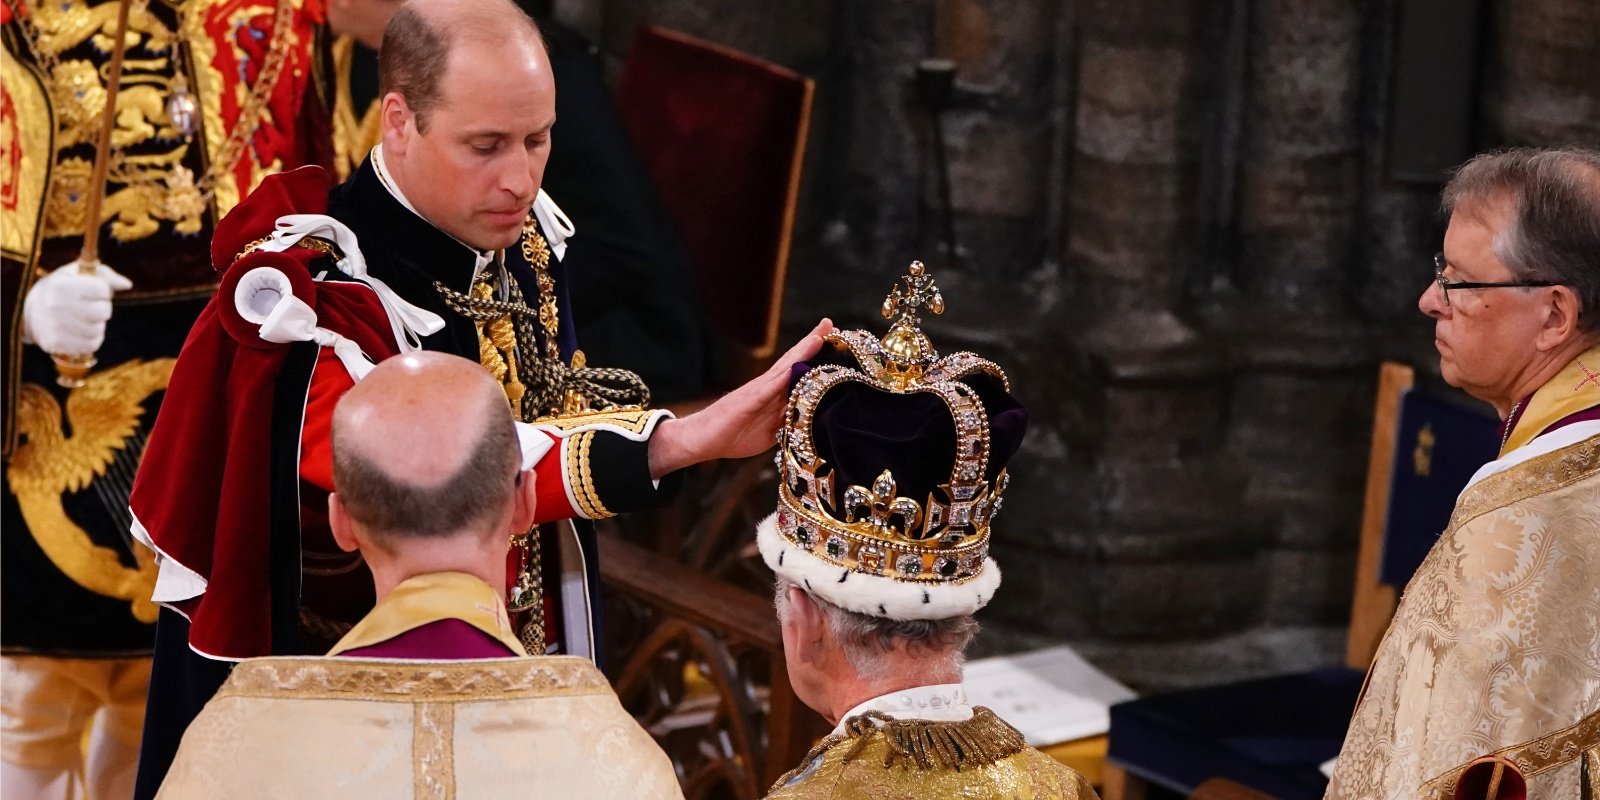 Prince William touches King Charles' crown during his coronation ceremony.